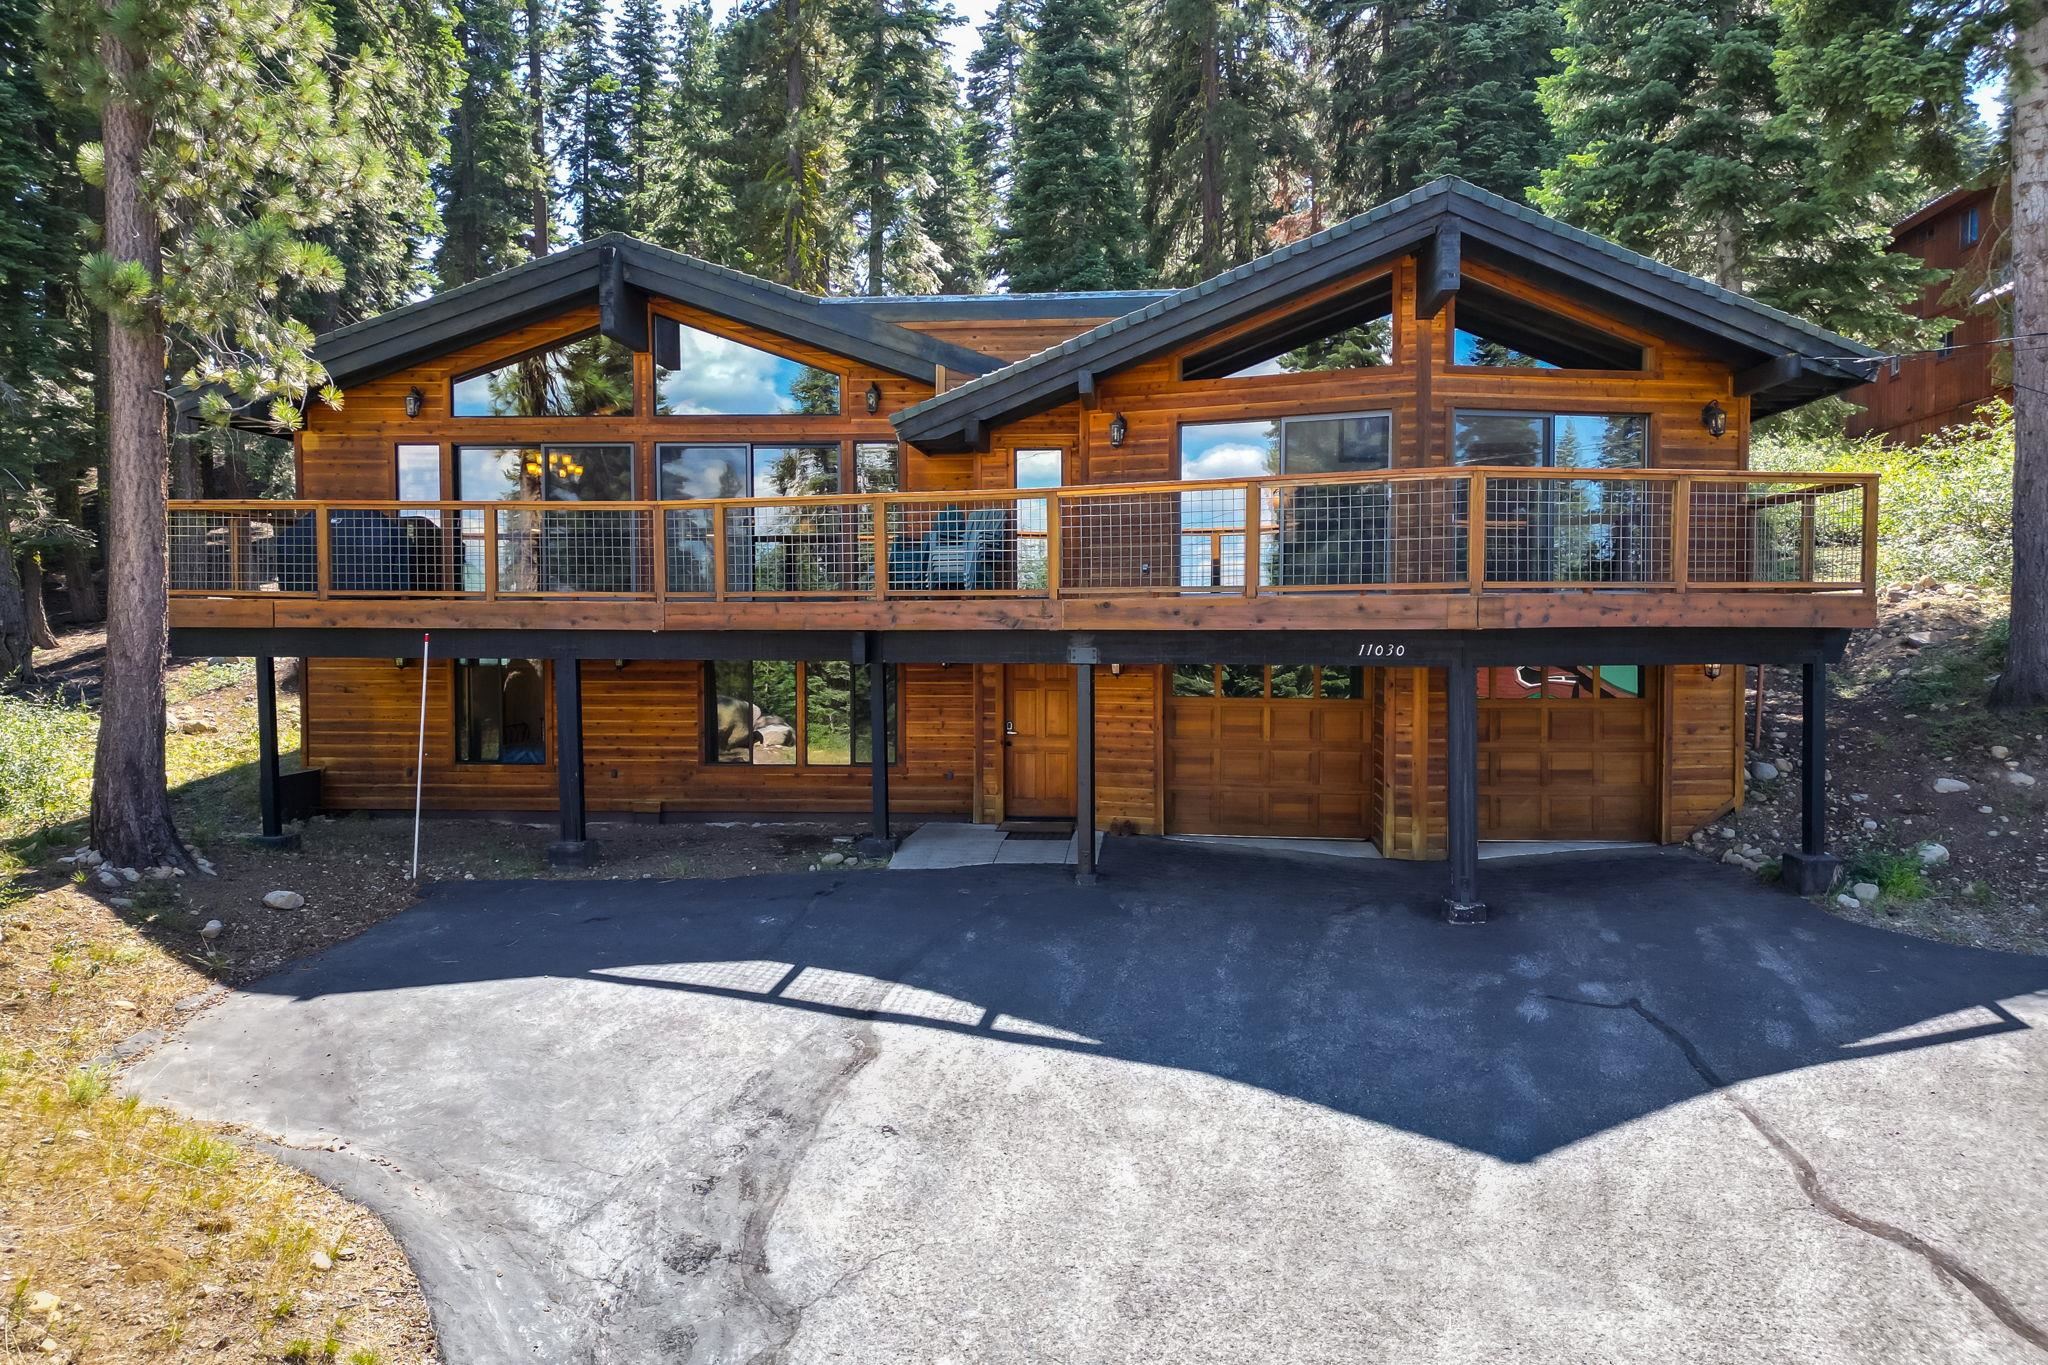 Image for 11030 Skislope Way, Truckee, CA 96161